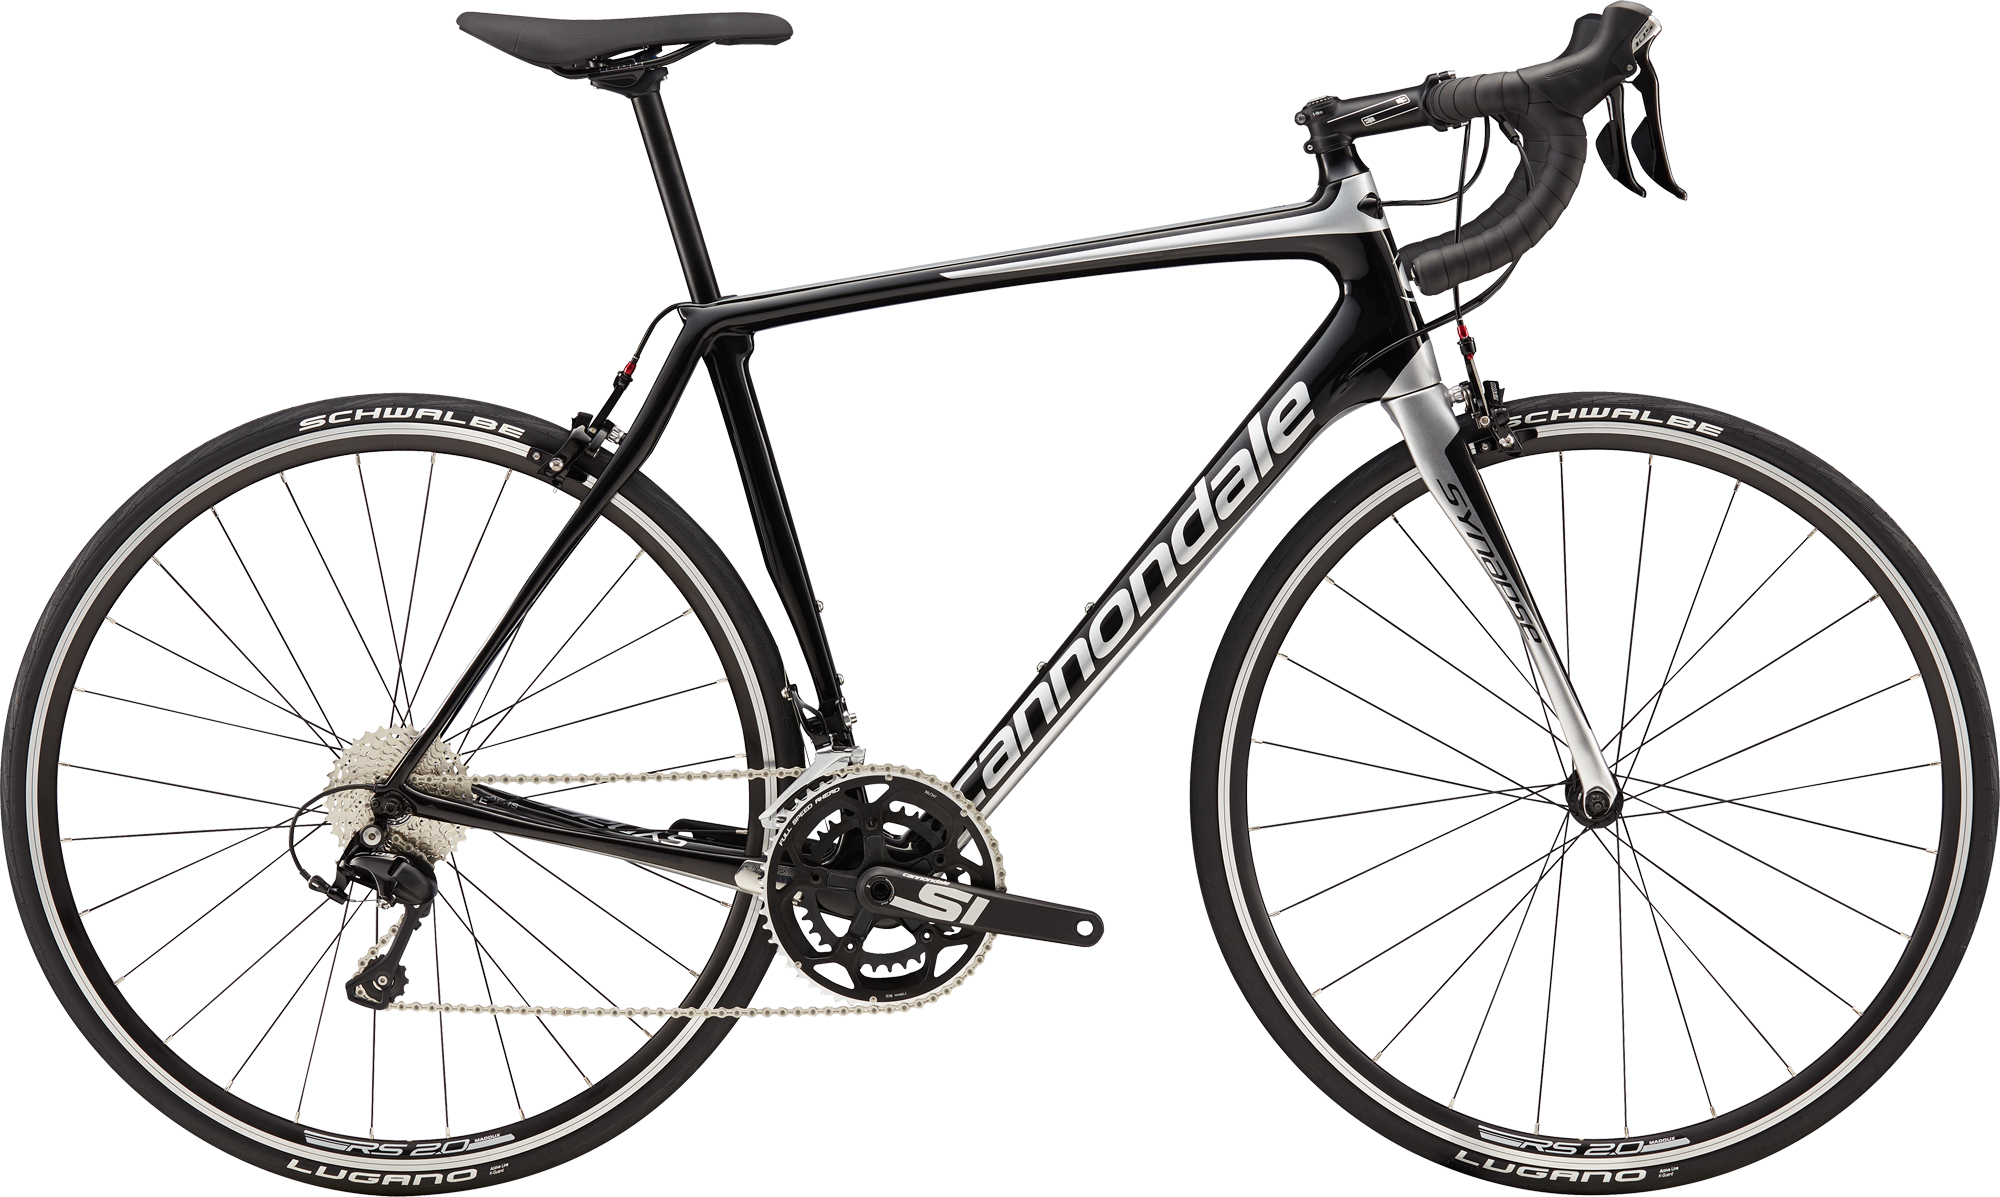 Cannondale Synapse Carbon 105 - Toga! New York's Oldest and 